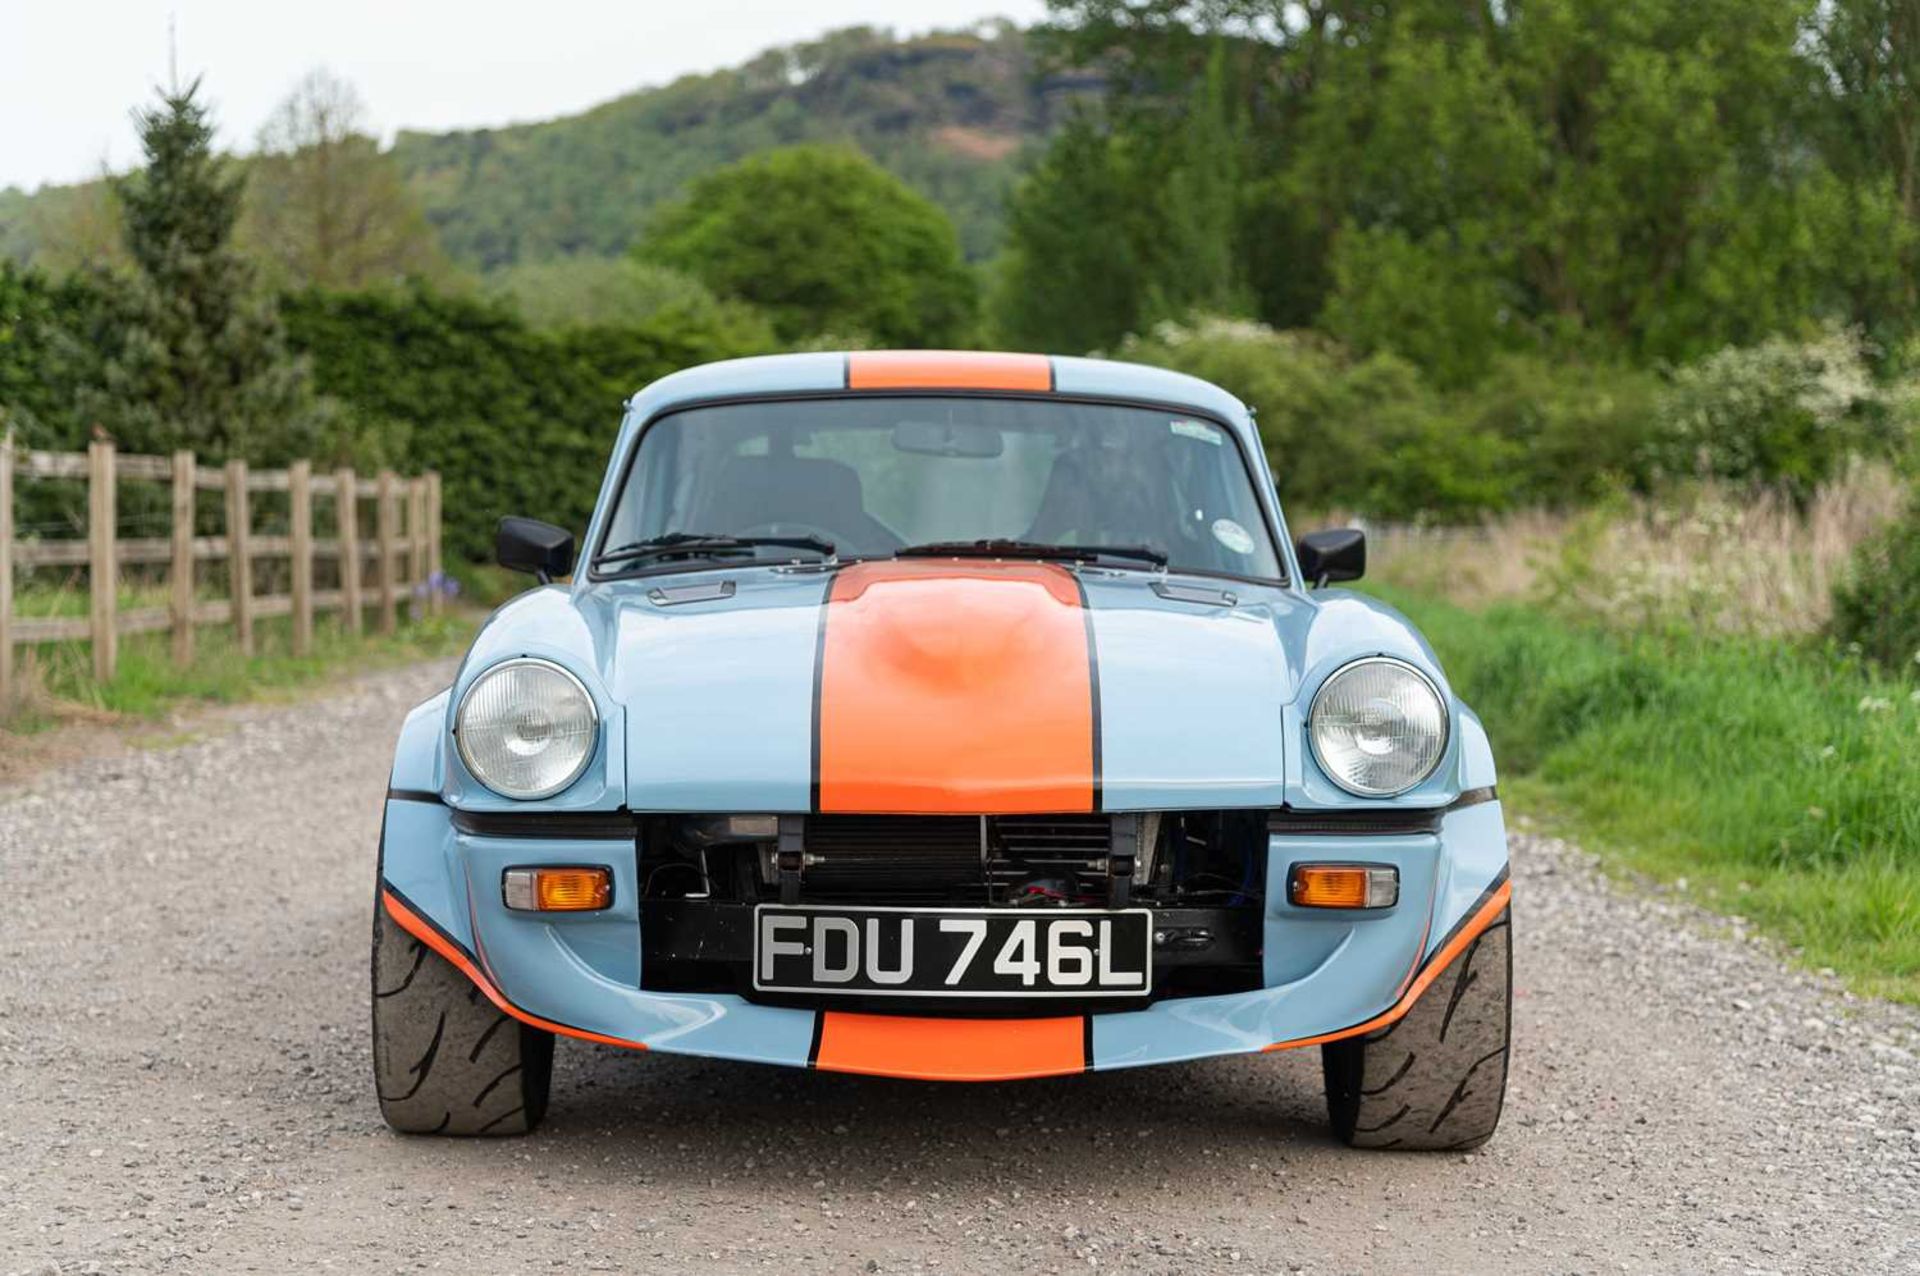 1973 Triumph GT6  ***NO RESERVE*** Presented in Gulf Racing-inspired paintwork, road-going track wea - Image 4 of 65